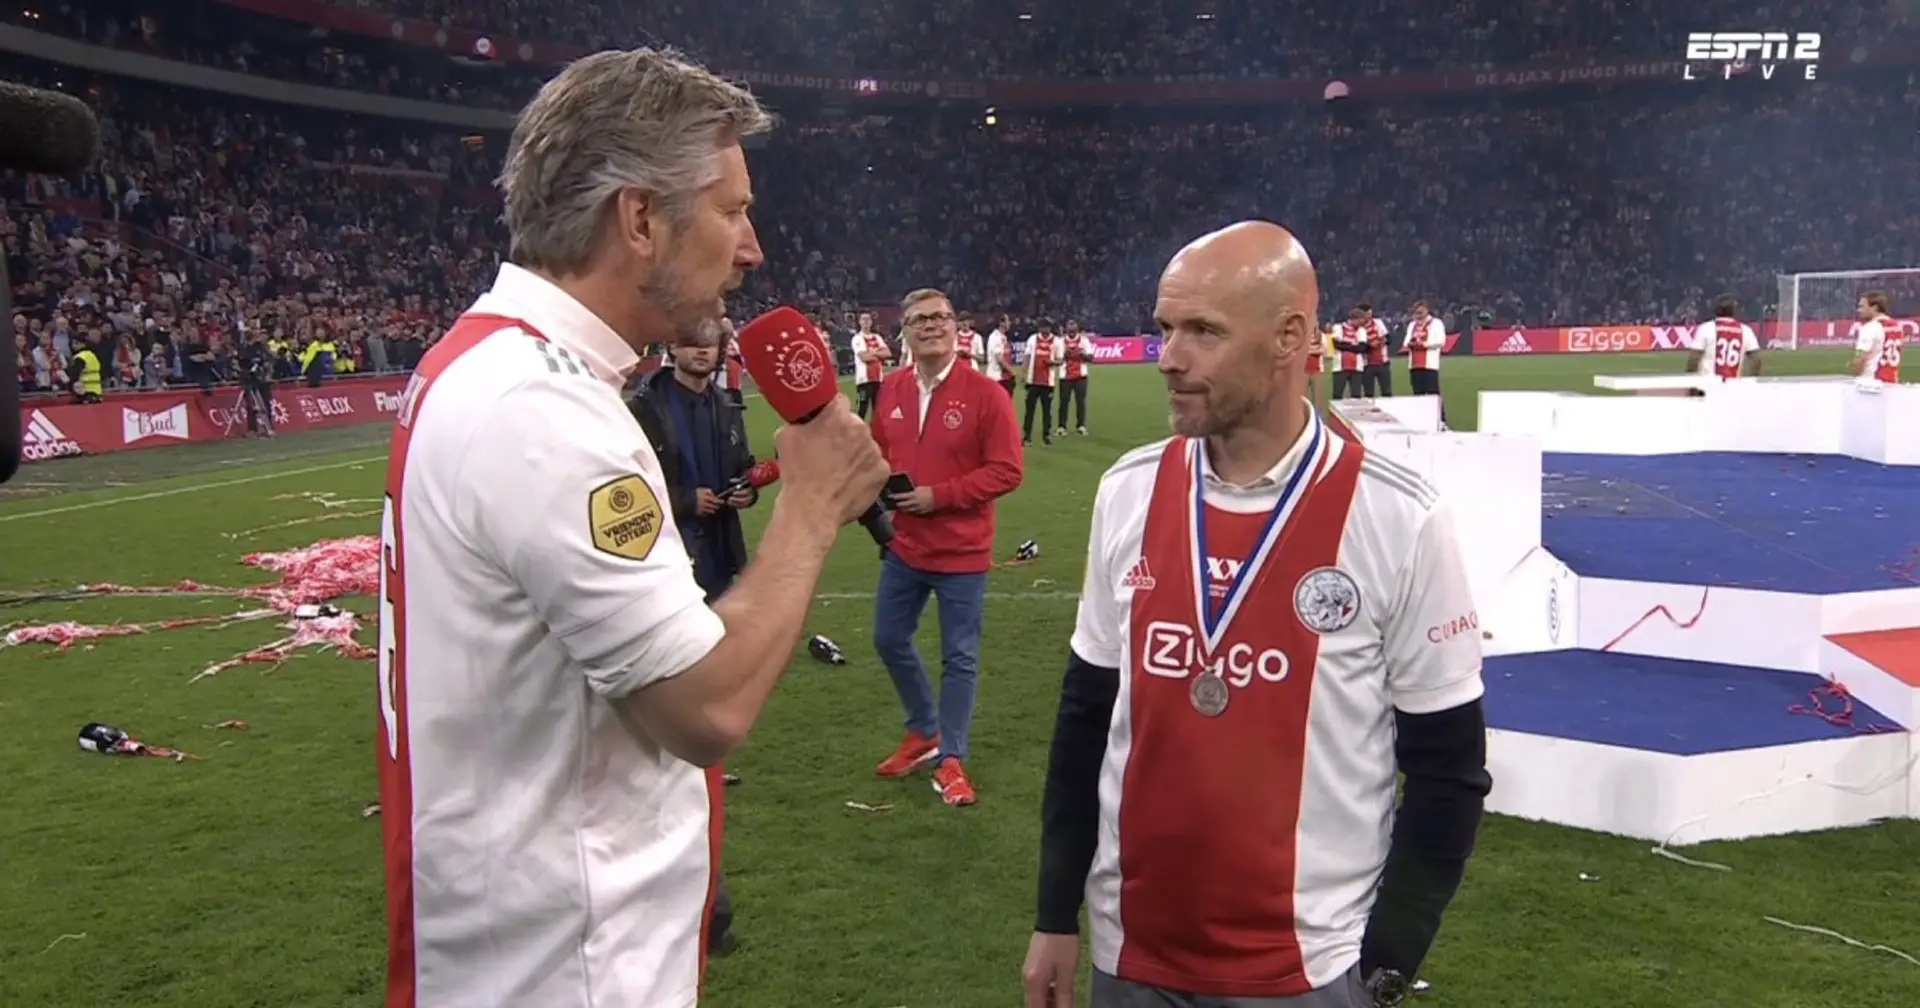 'You will leave for a club that is close to my heart': Van der Sar wishes Ten Hag luck and calls him a 'weird man'